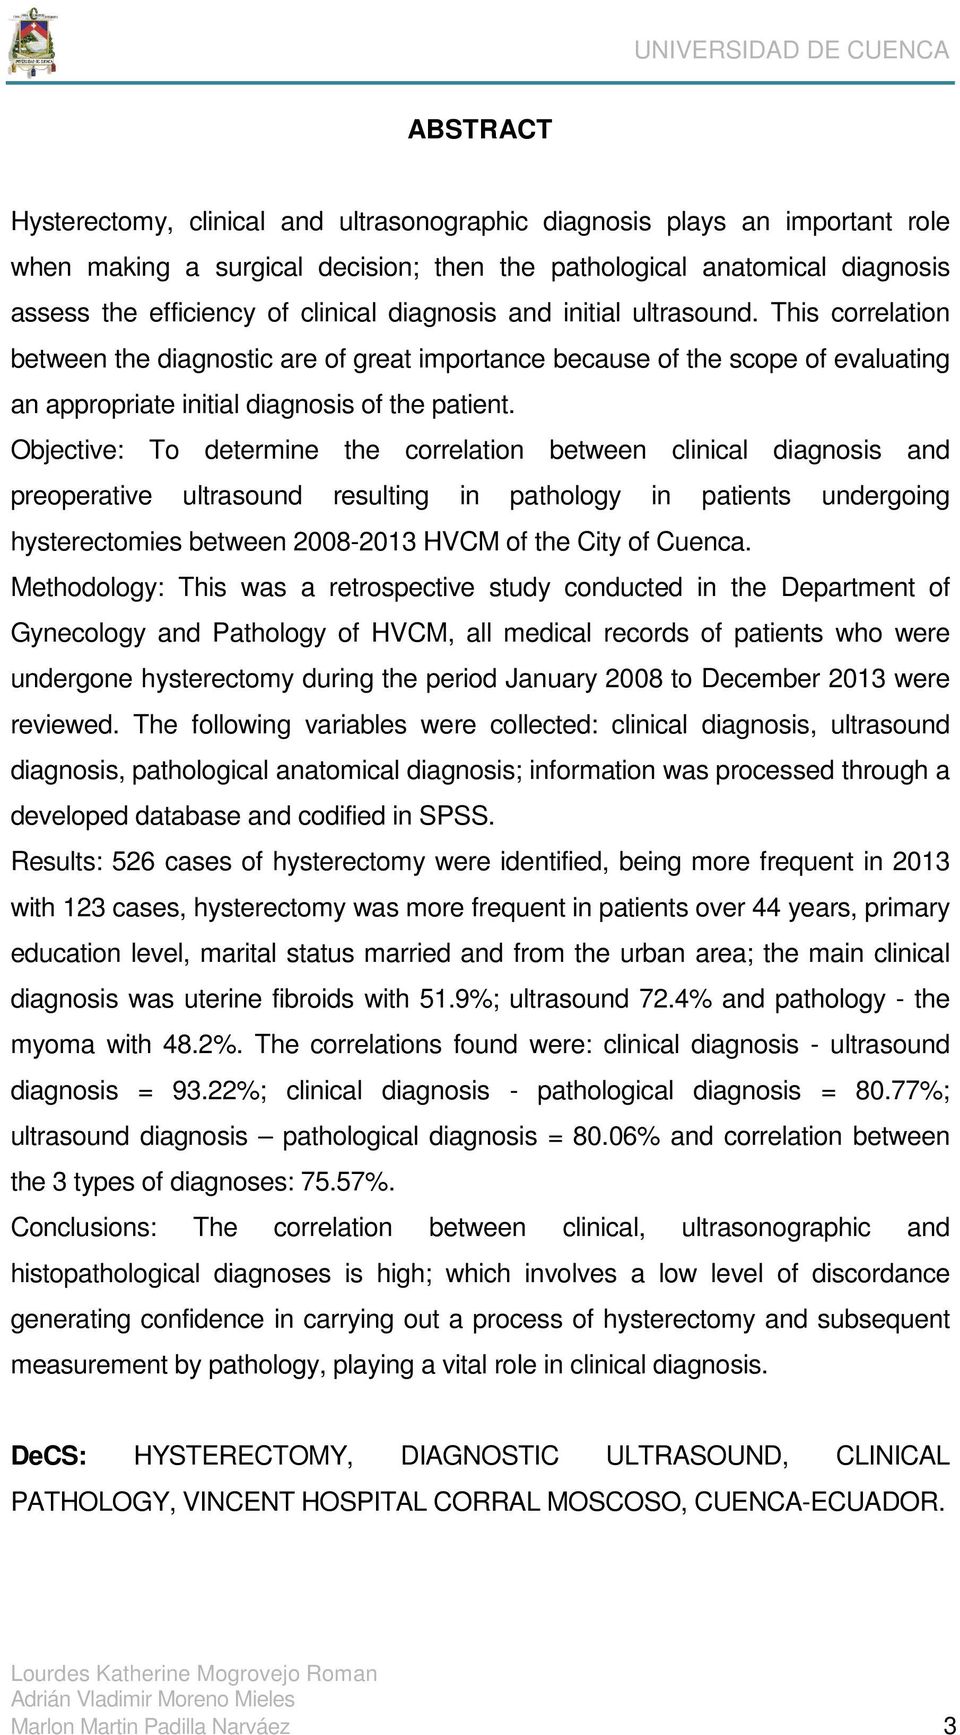 Objective: To determine the correlation between clinical diagnosis and preoperative ultrasound resulting in pathology in patients undergoing hysterectomies between 2008-2013 HVCM of the City of